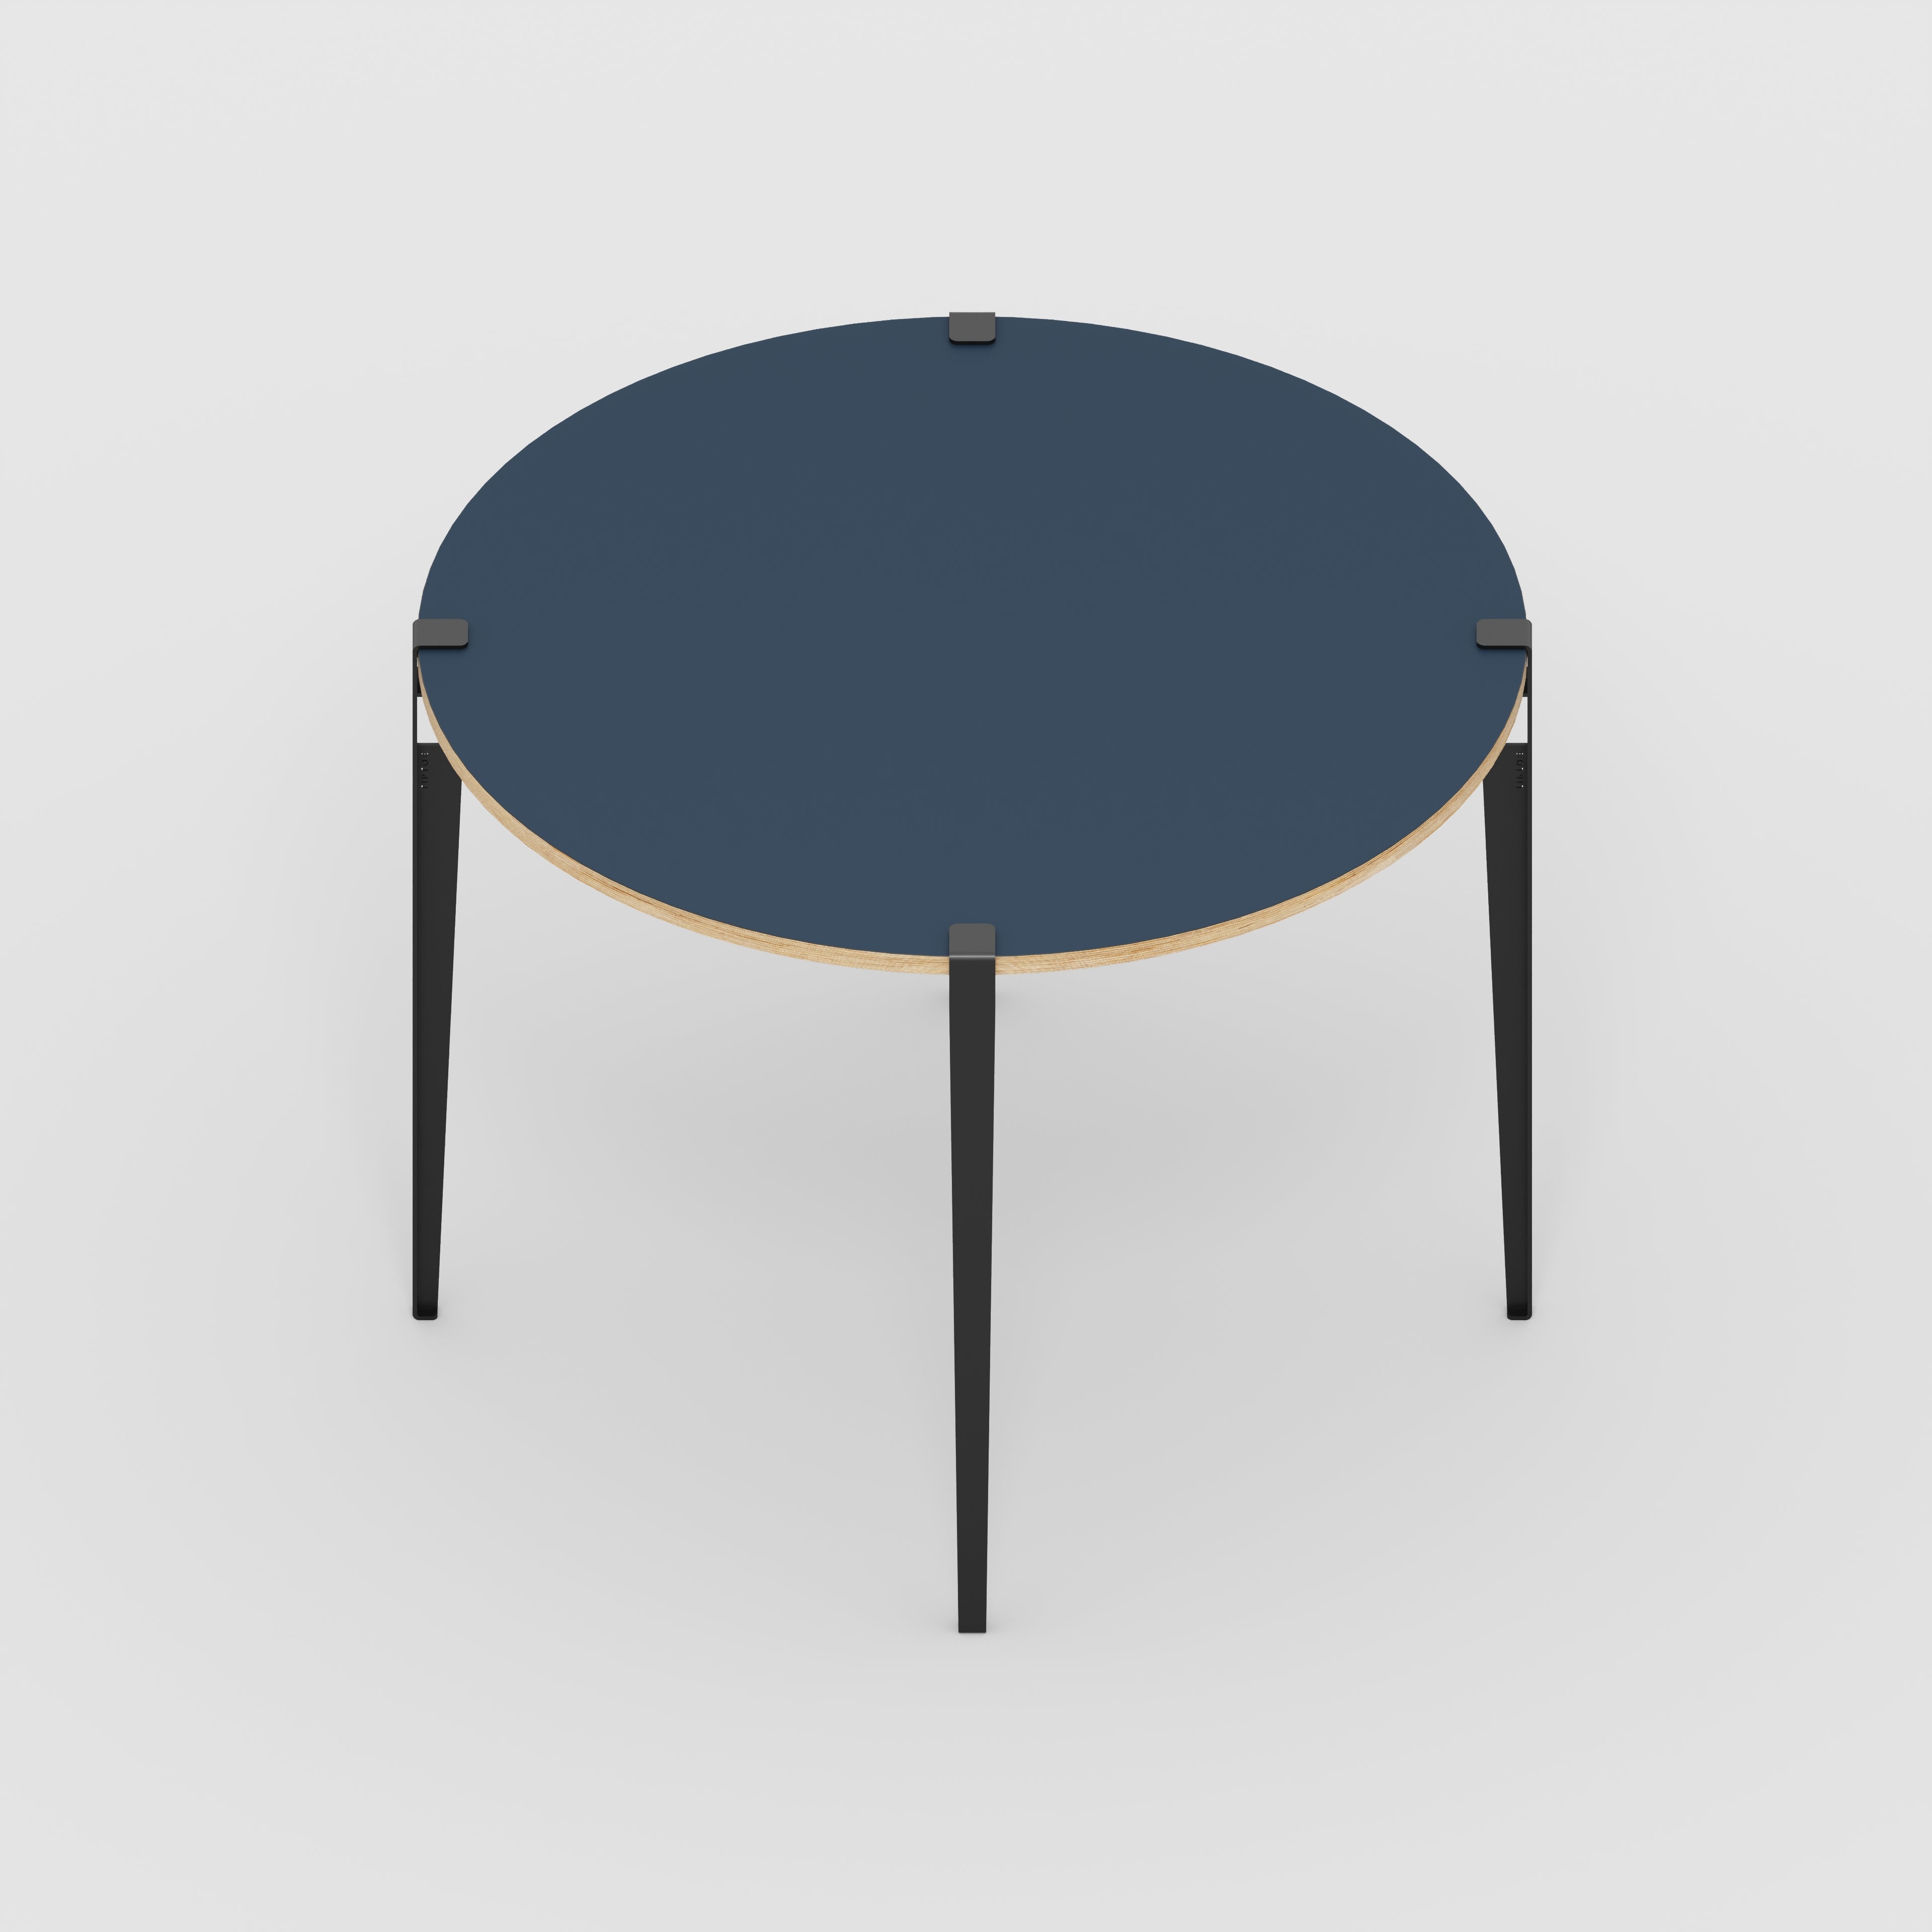 Round Table with Black Tiptoe Legs - Formica Night Sea Blue - 1200(dia) x 900(h)